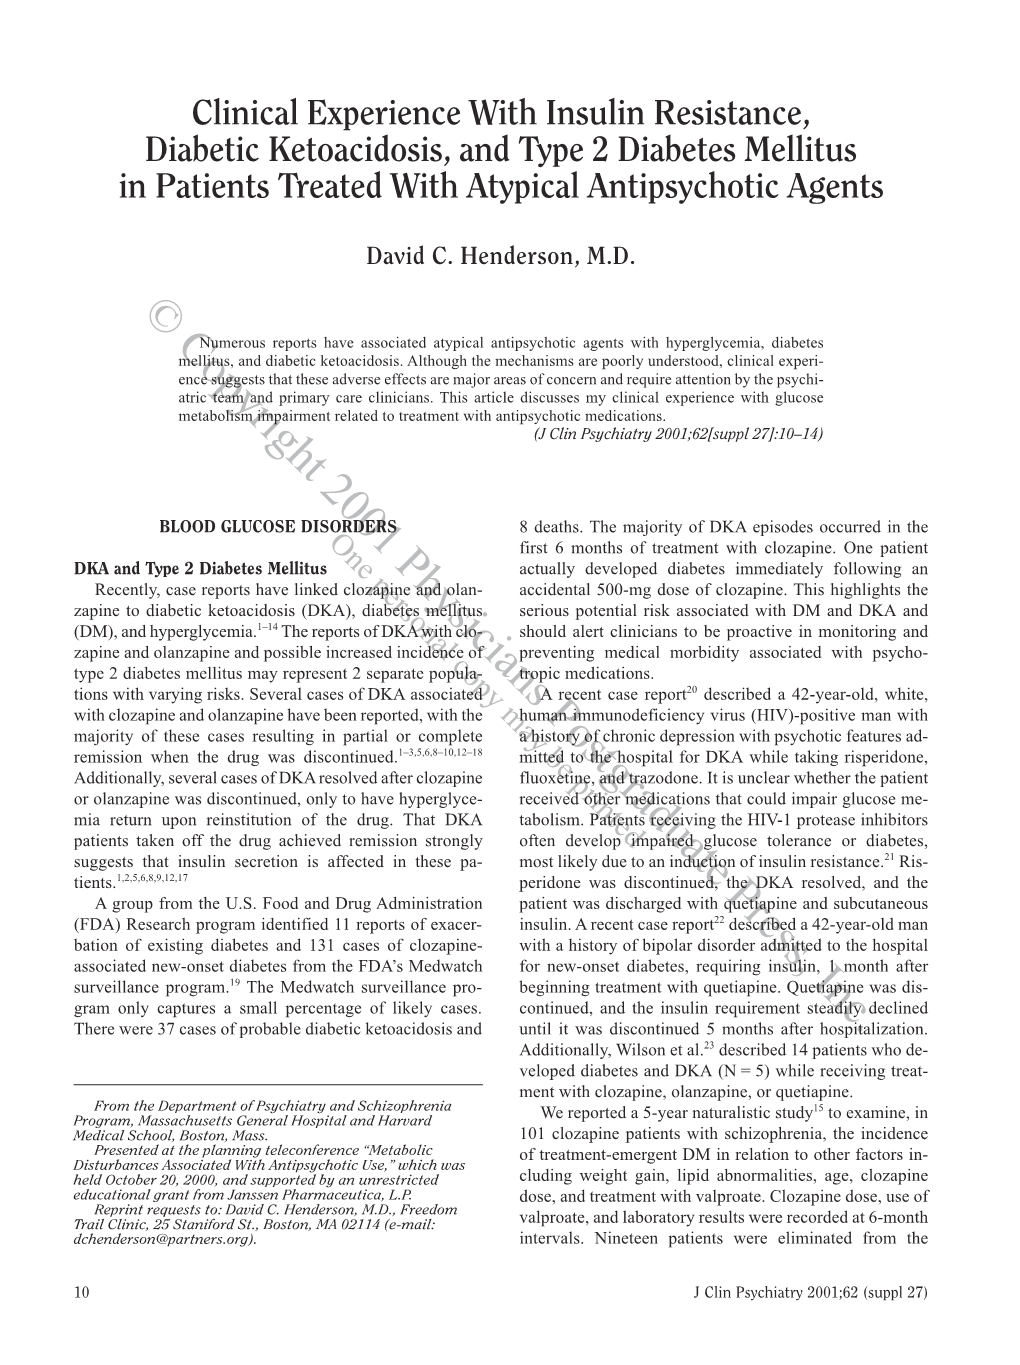 Clinical Experience with Insulin Resistance, Diabetic Ketoacidosis, and Type 2 Diabetes Mellitus in Patients Treated with Atypical Antipsychotic Agents